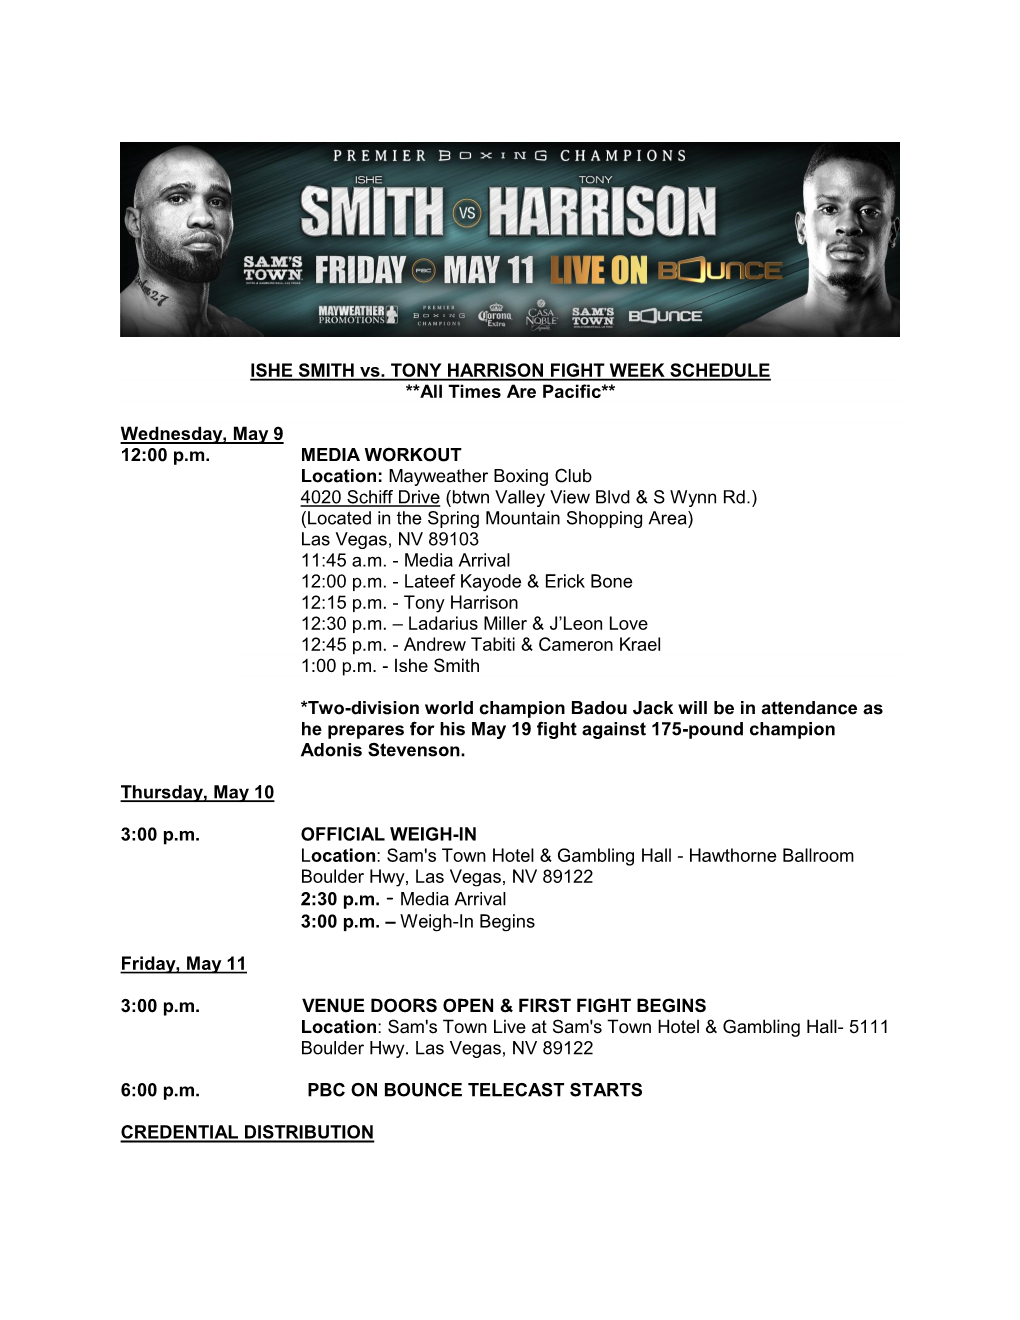 ISHE SMITH Vs. TONY HARRISON FIGHT WEEK SCHEDULE **All Times Are Pacific**